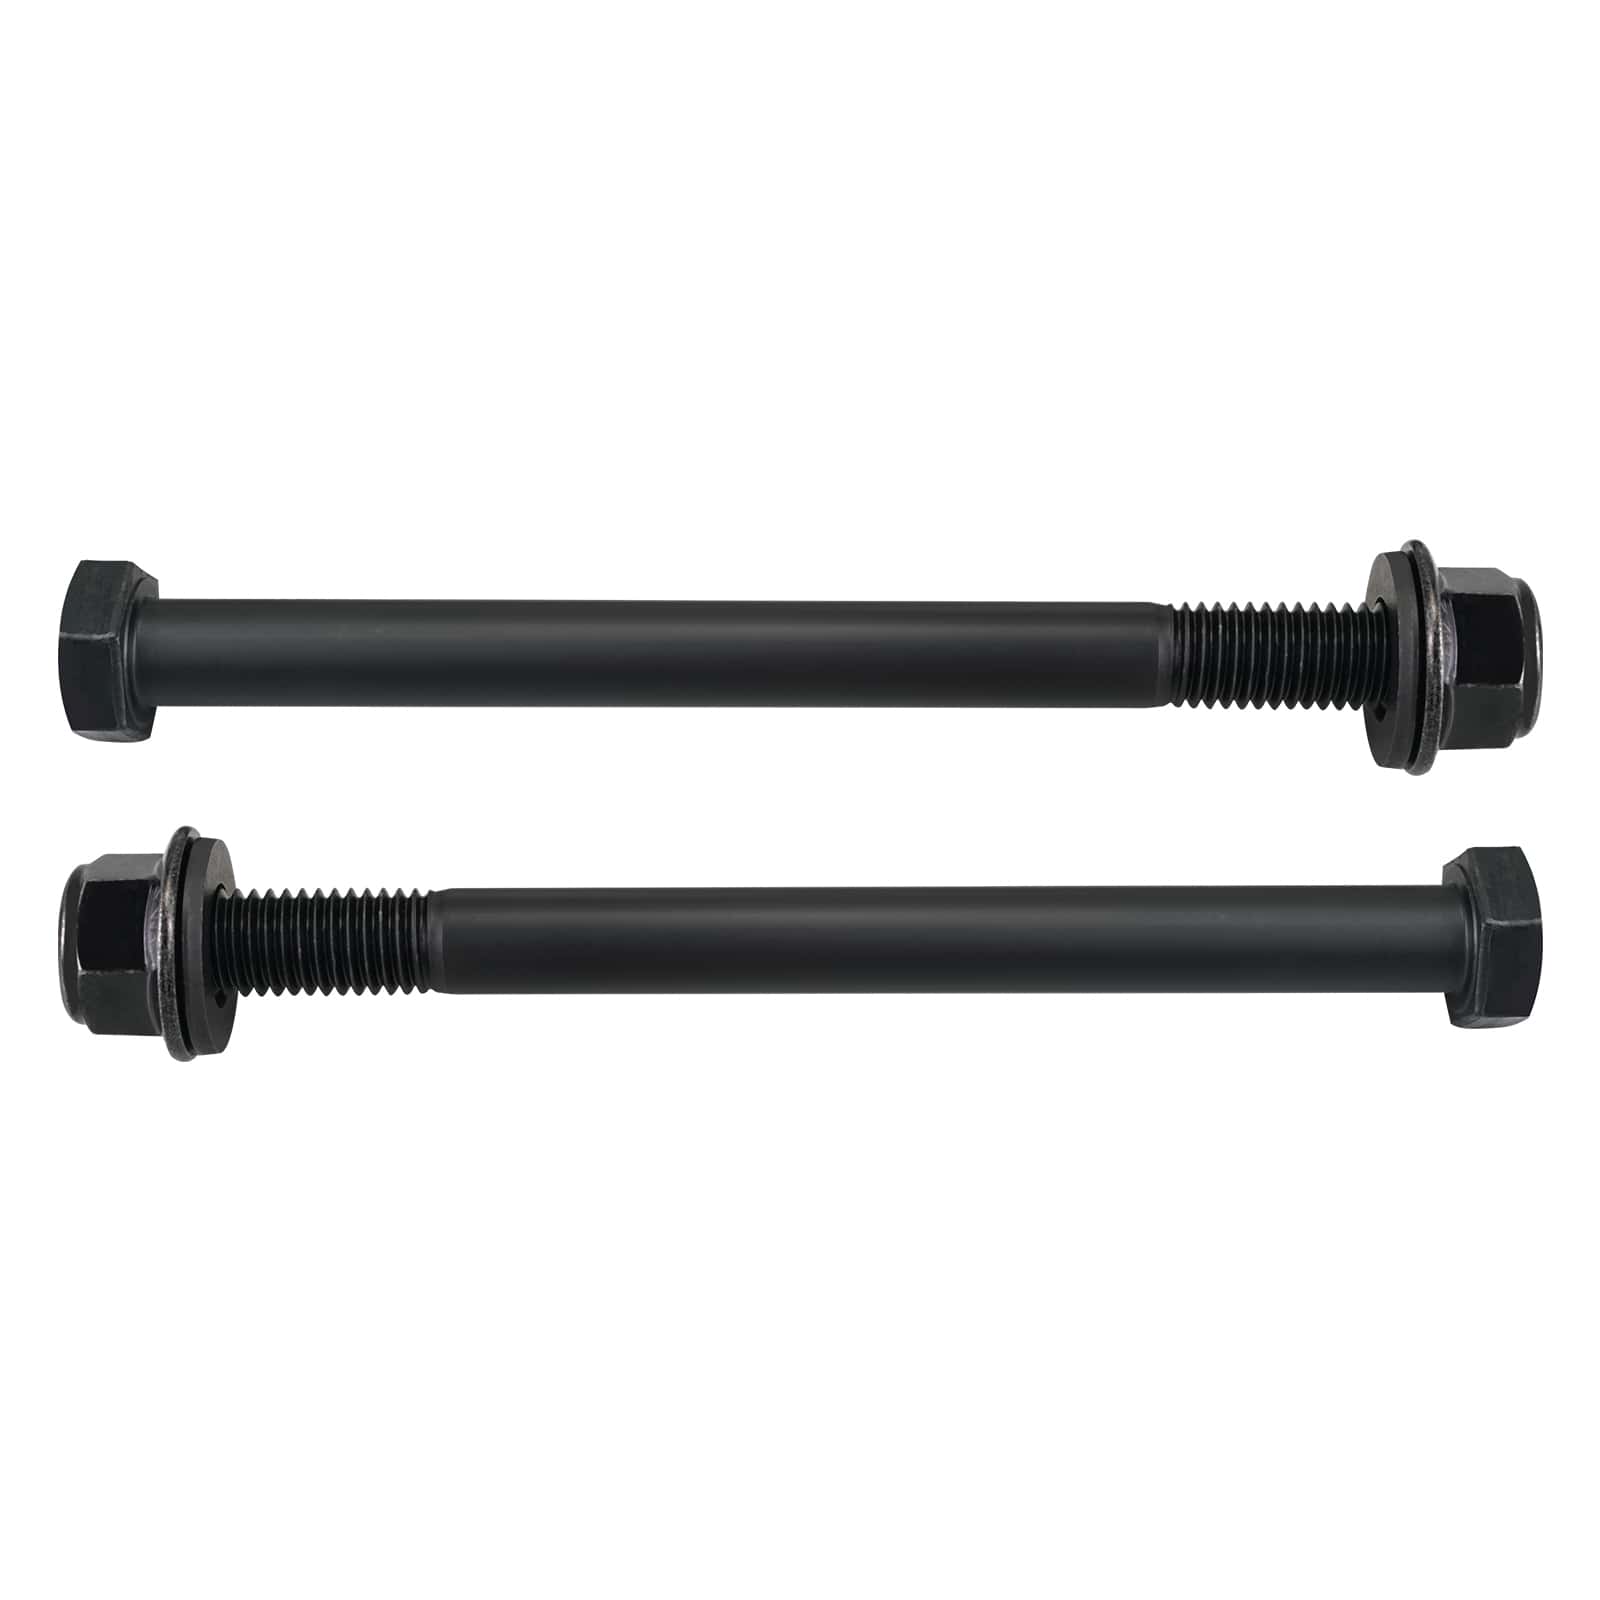 M12X1.75 Front Upper Shock Tower Bolt Set Upgrade For Can-Am Maverick X3  Max RR Turbo